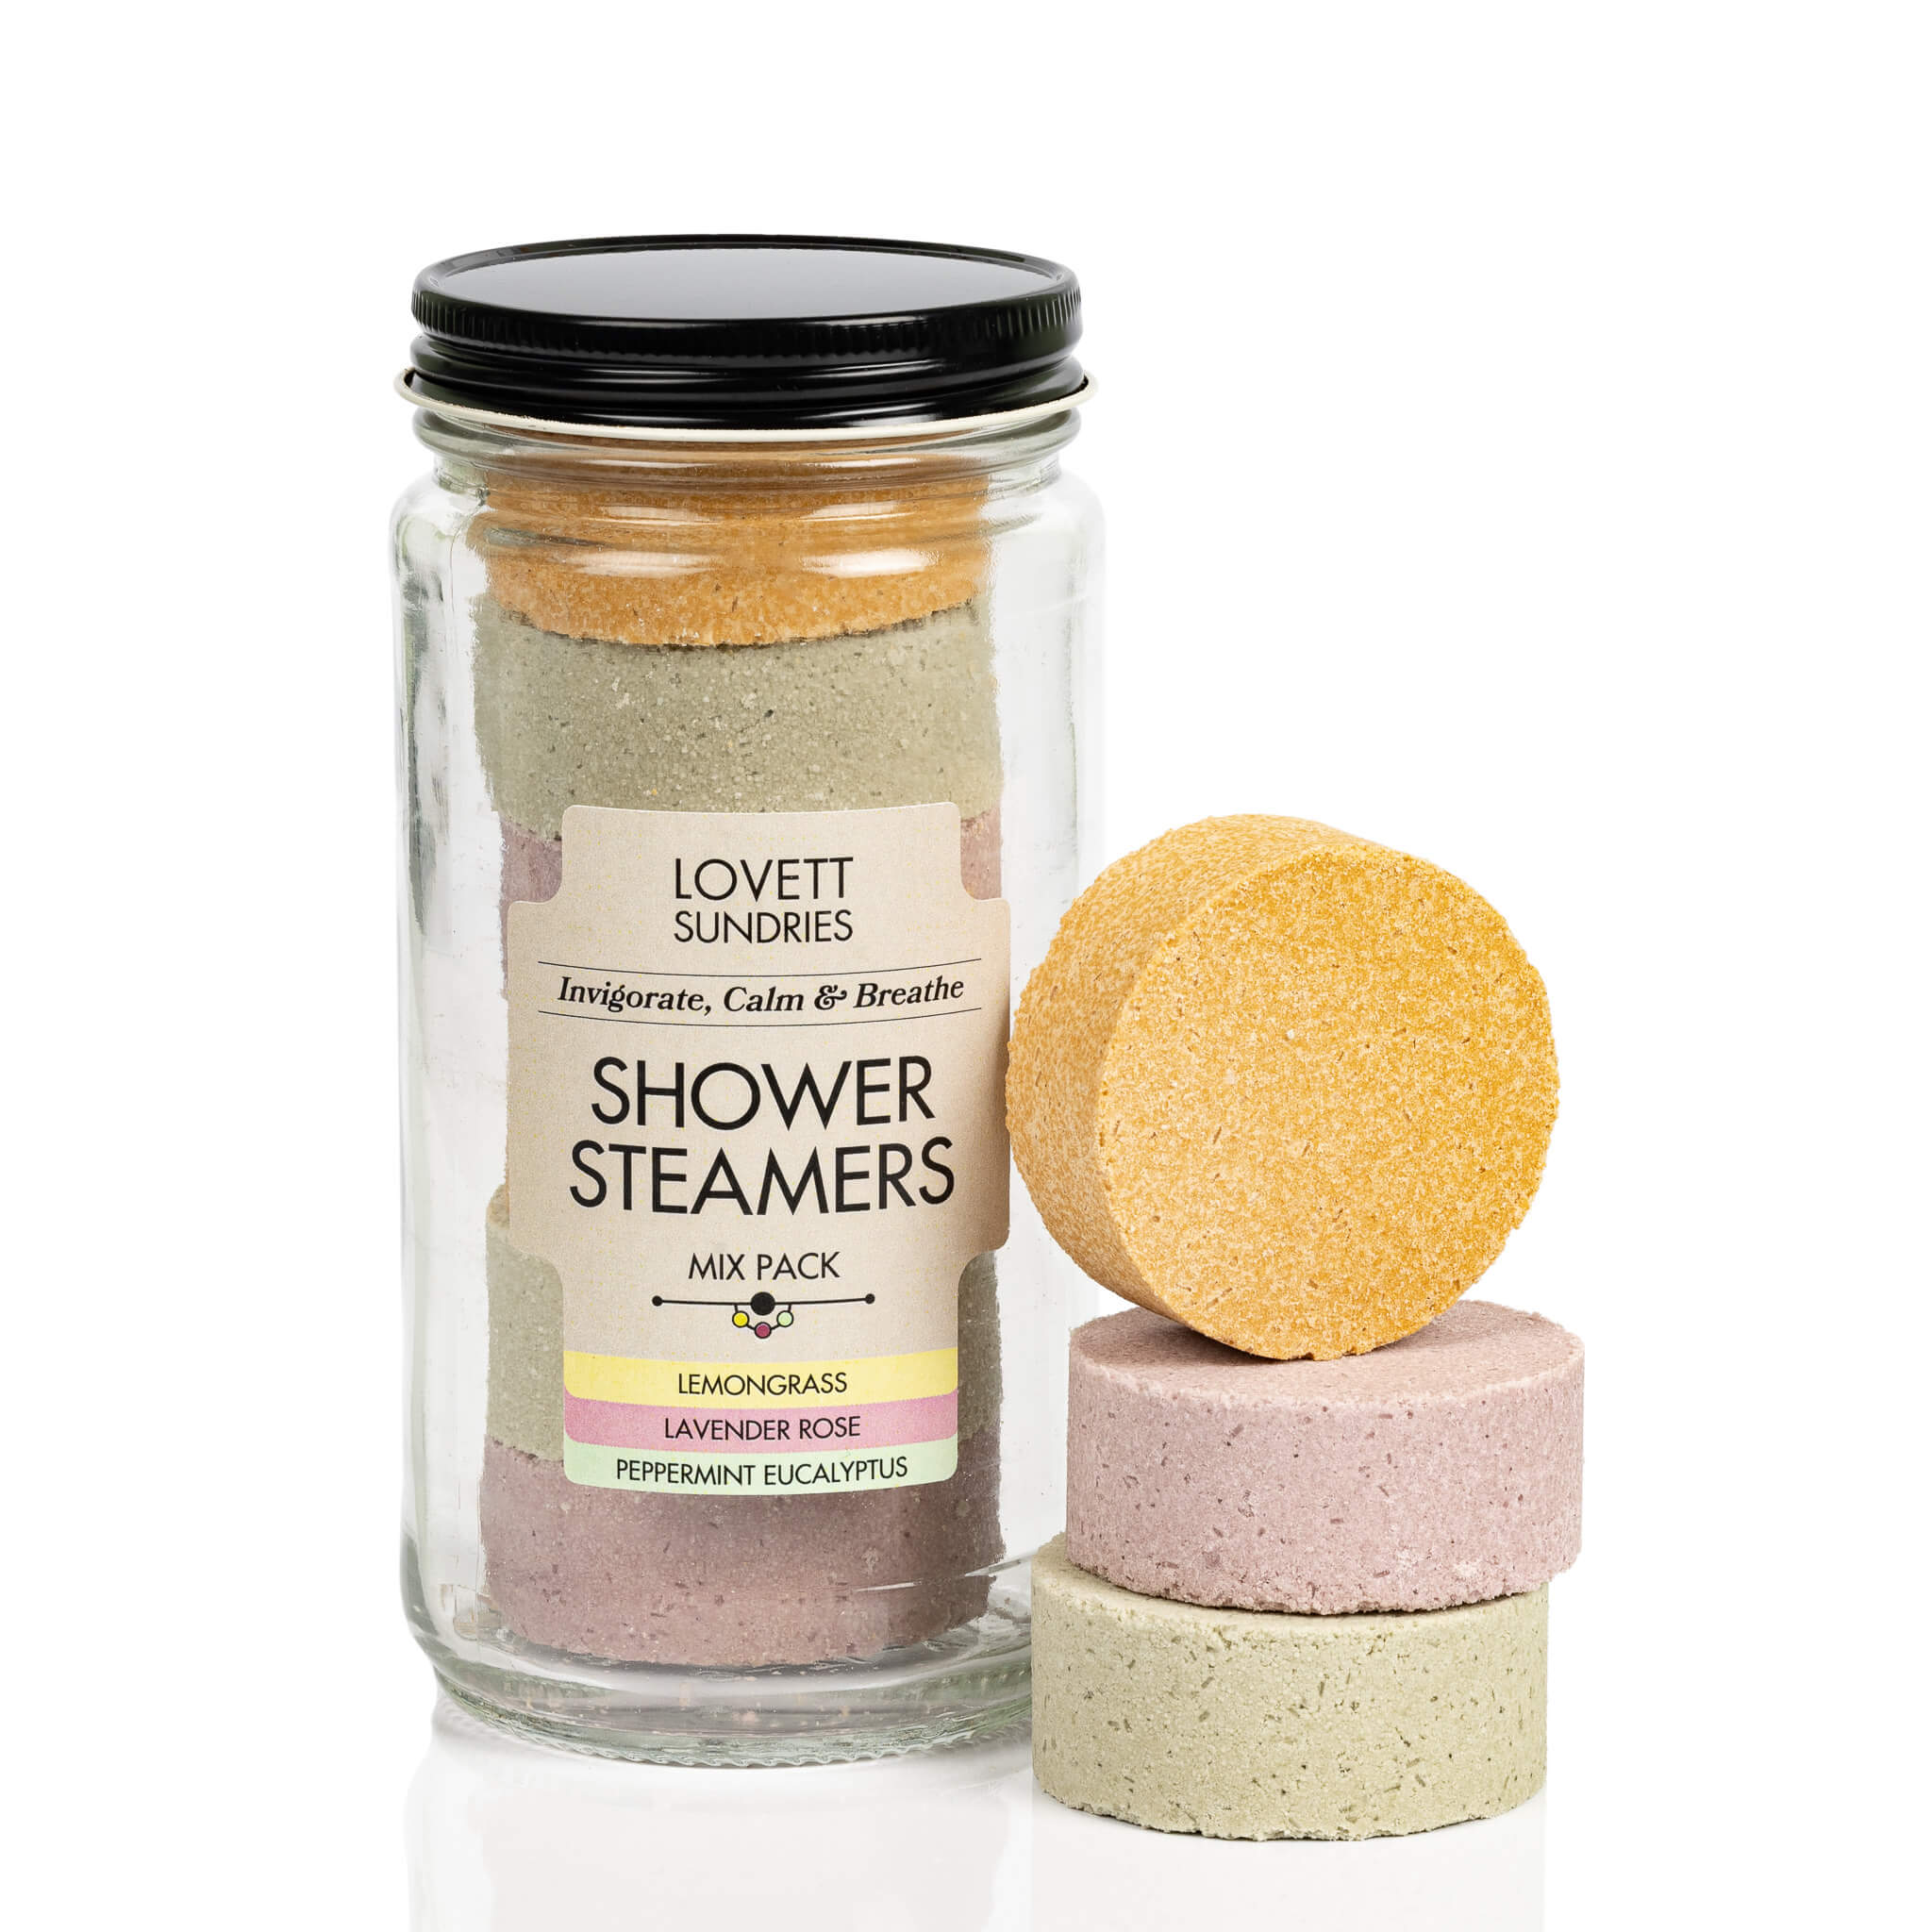 Recyclable glass jar filled with a mix of 6 all natural shower steamers.